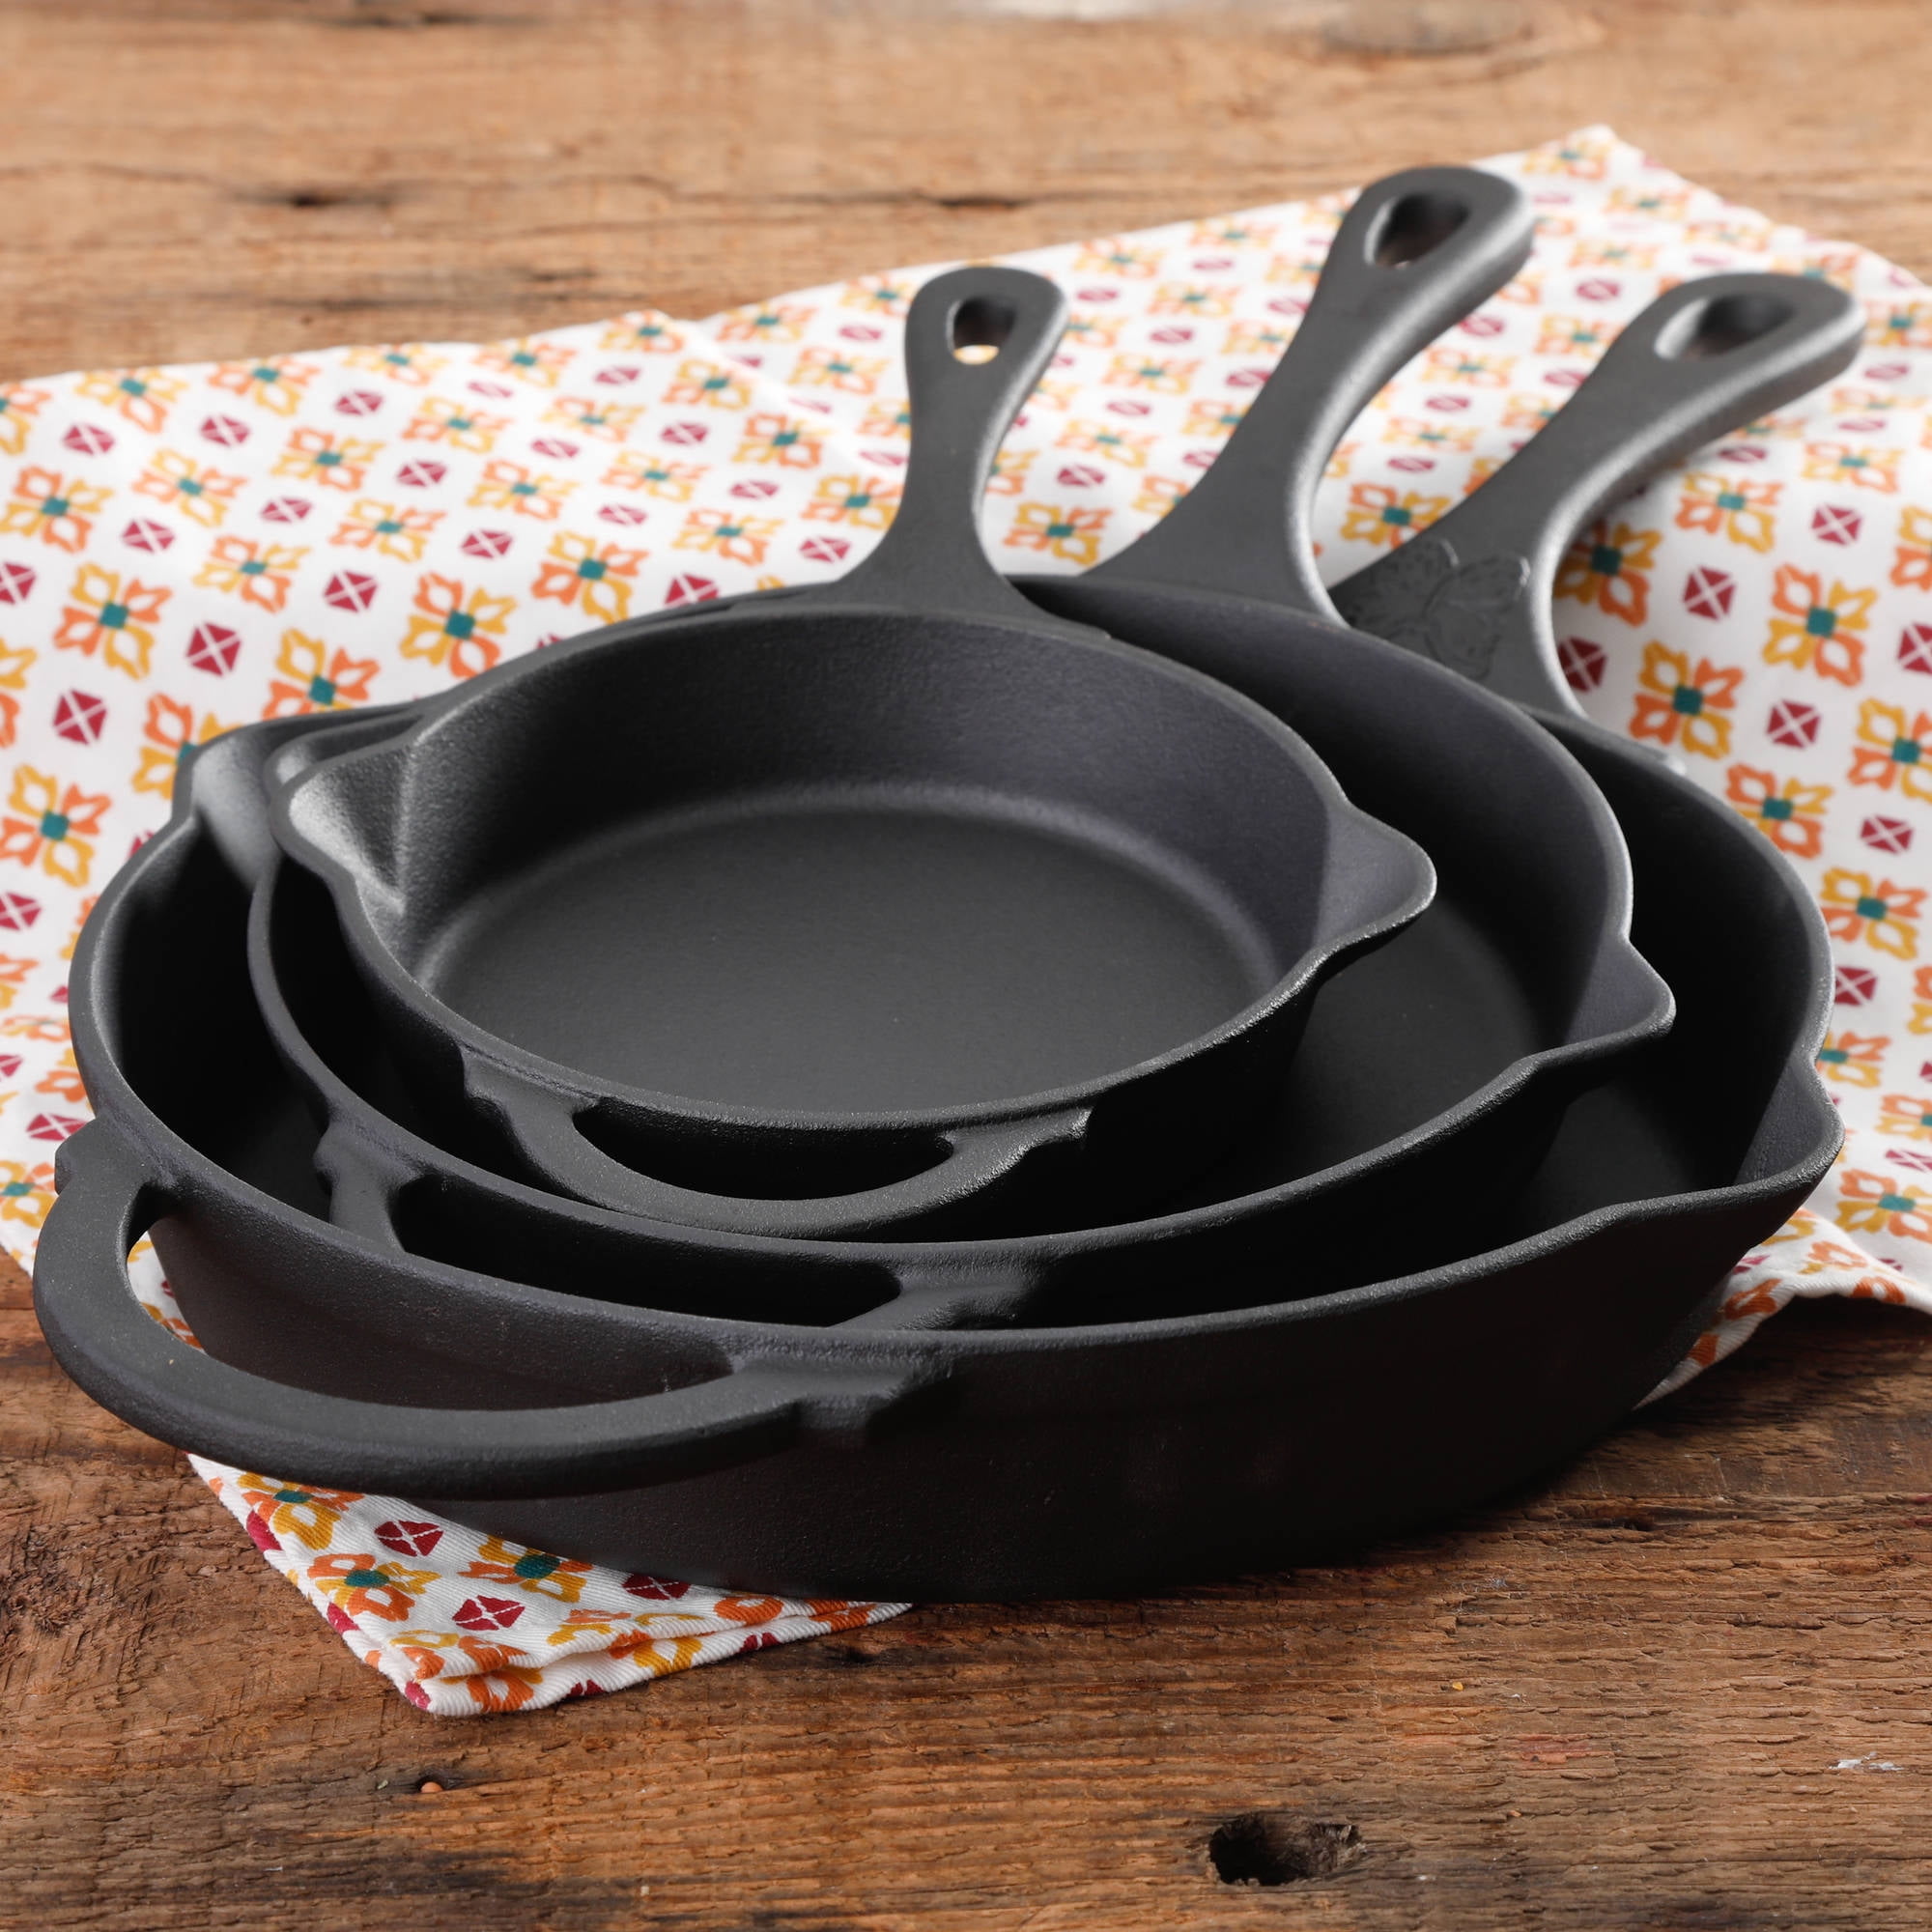 The Best Accessories for Cast Iron Care Now Come in One Set